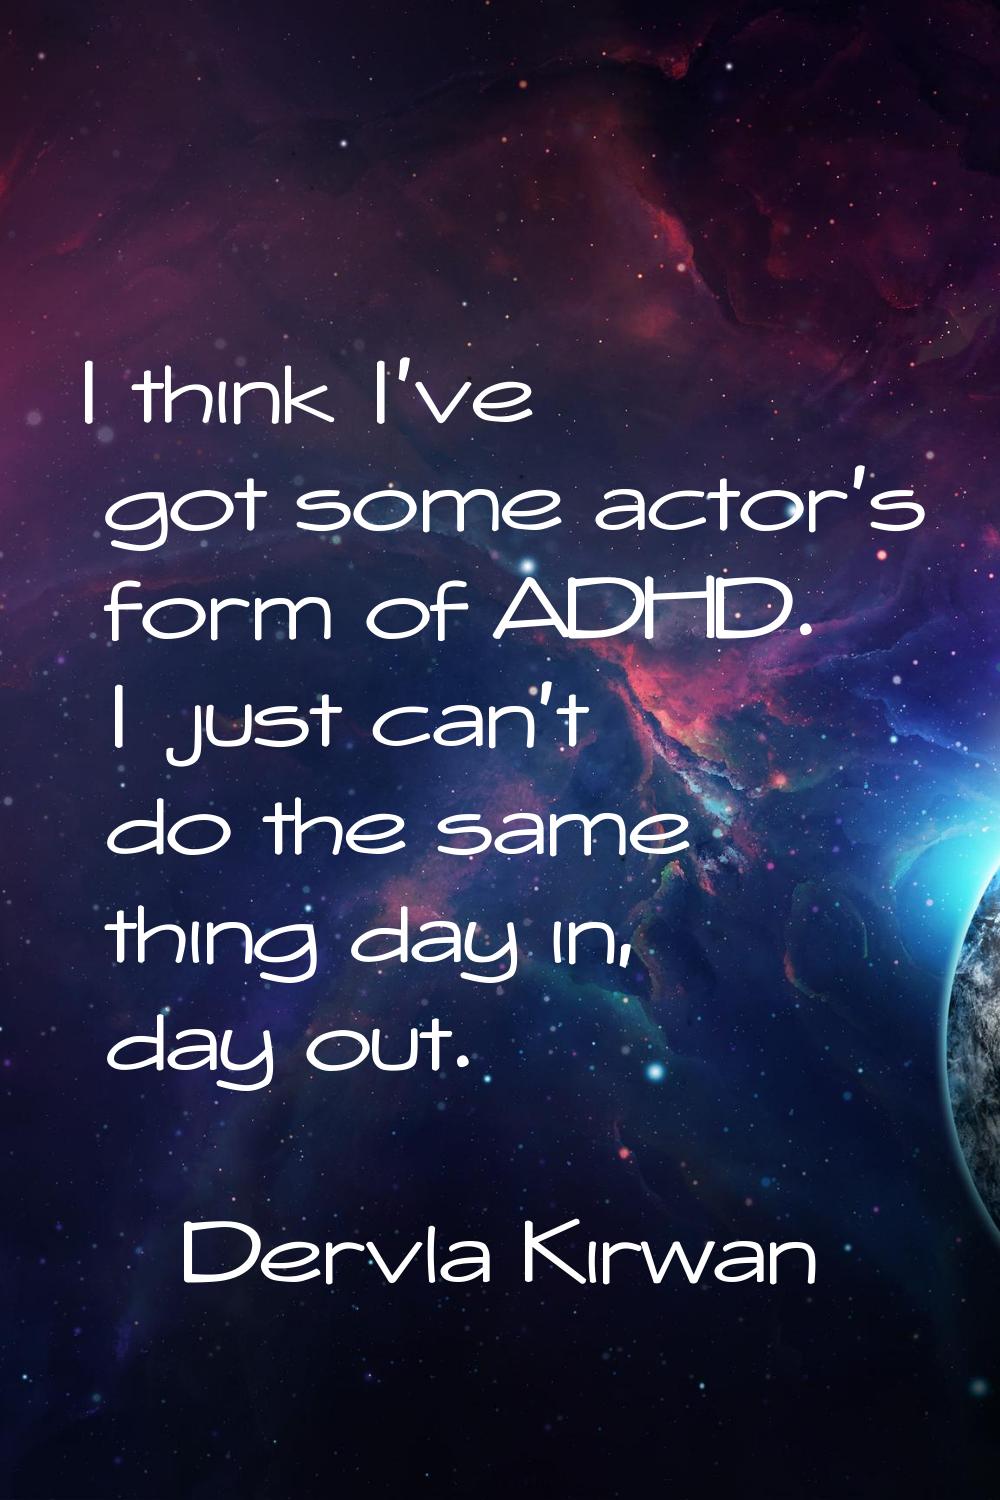 I think I've got some actor's form of ADHD. I just can't do the same thing day in, day out.